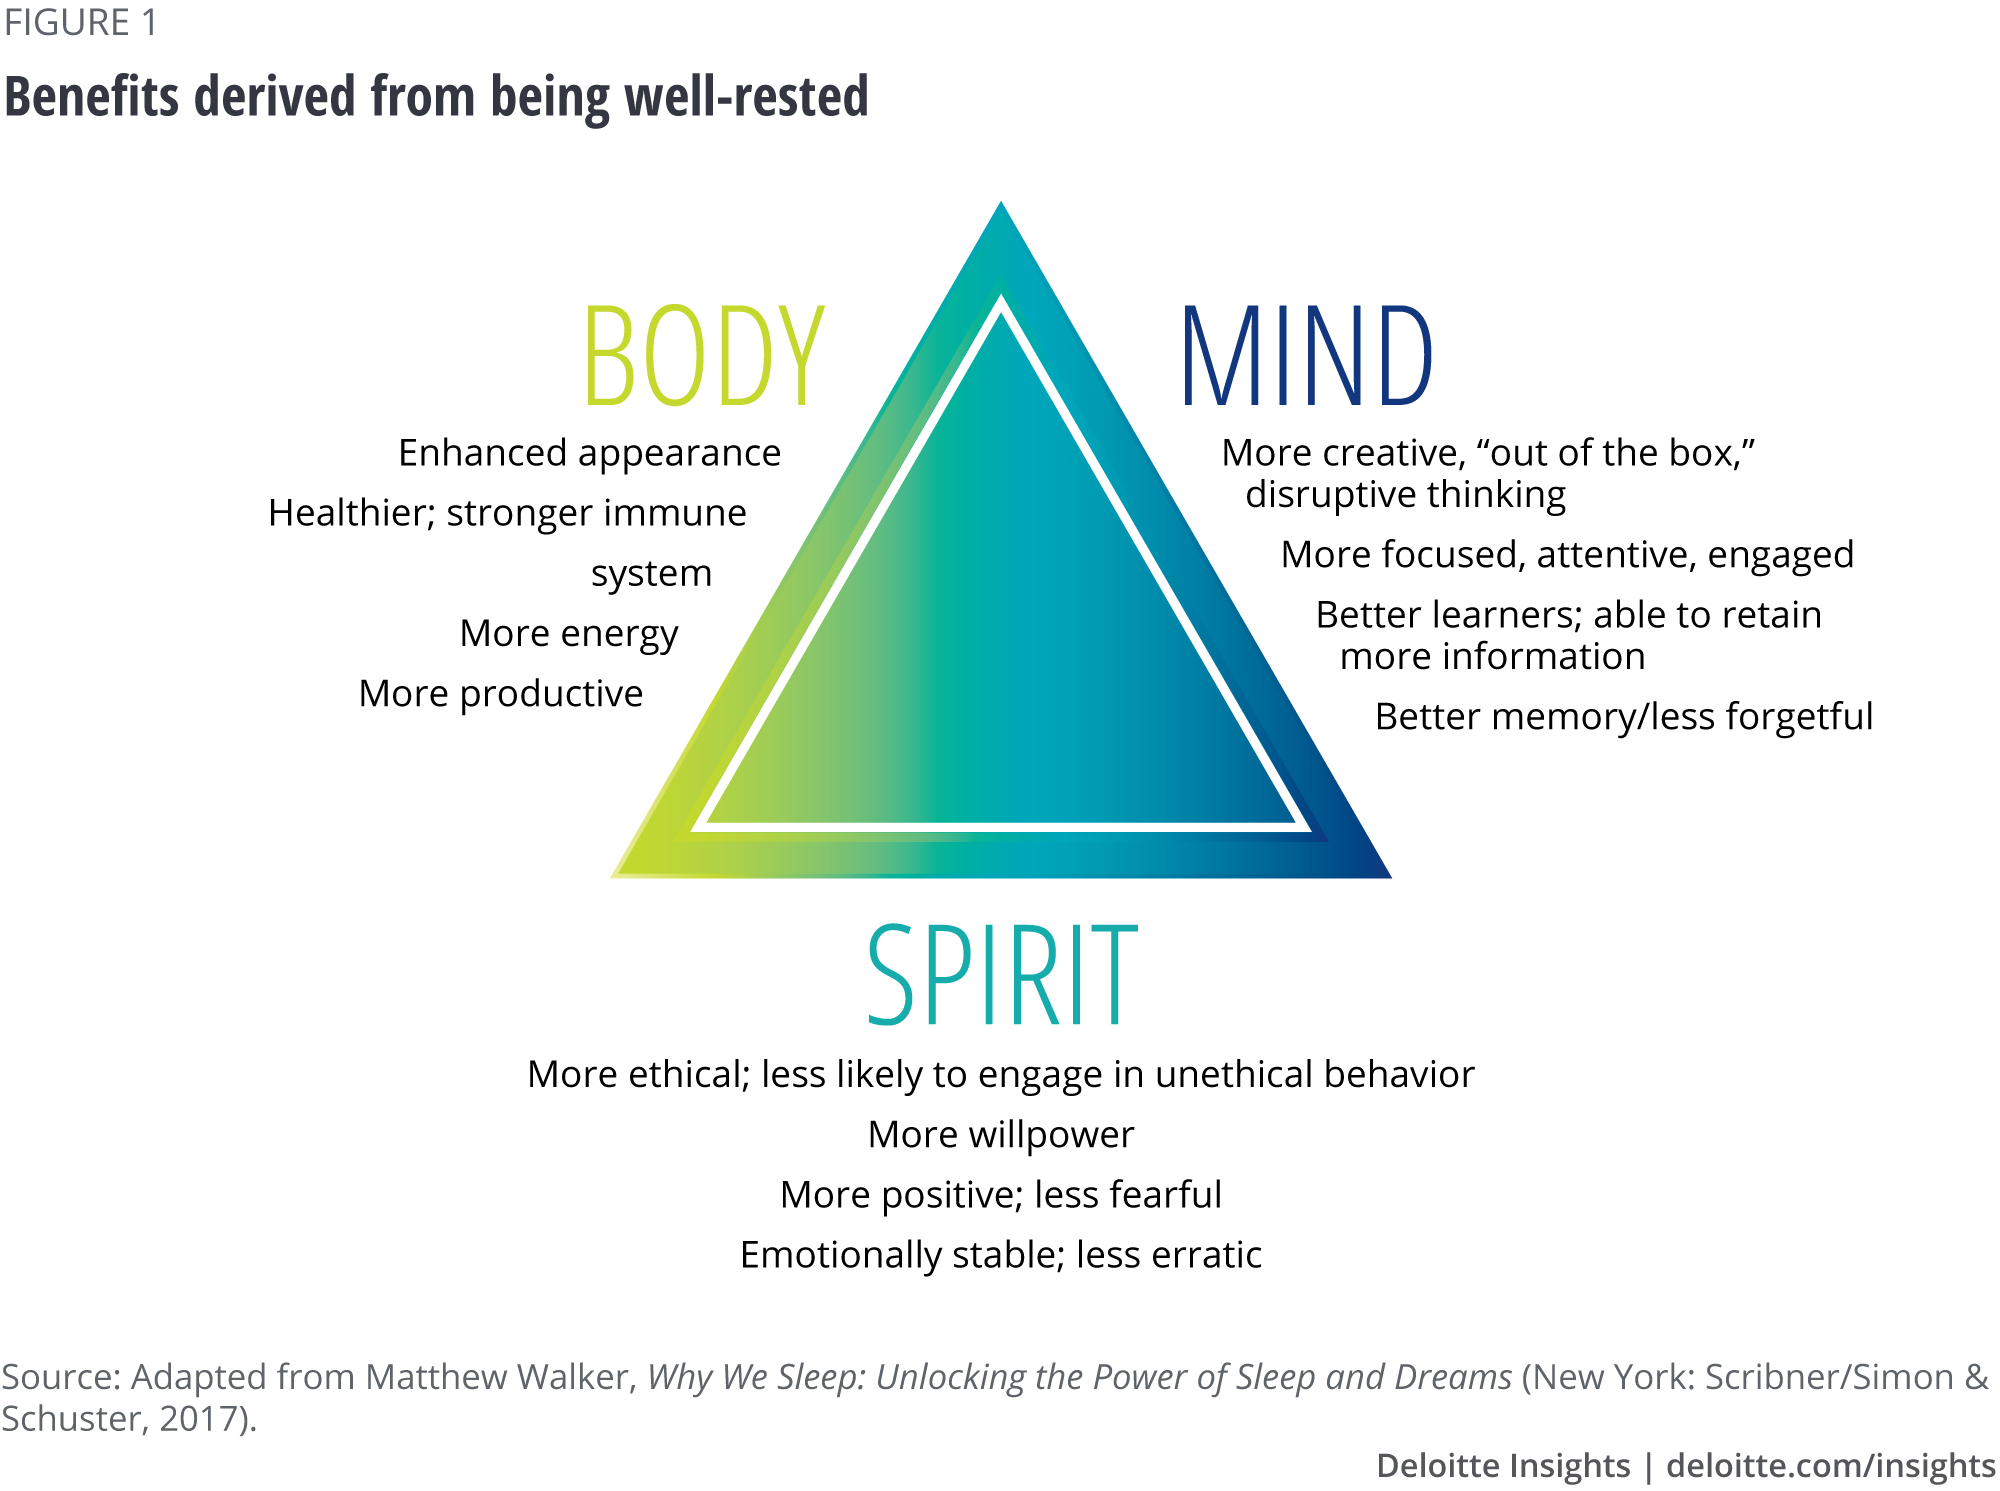 Benefits derived from being well-rested